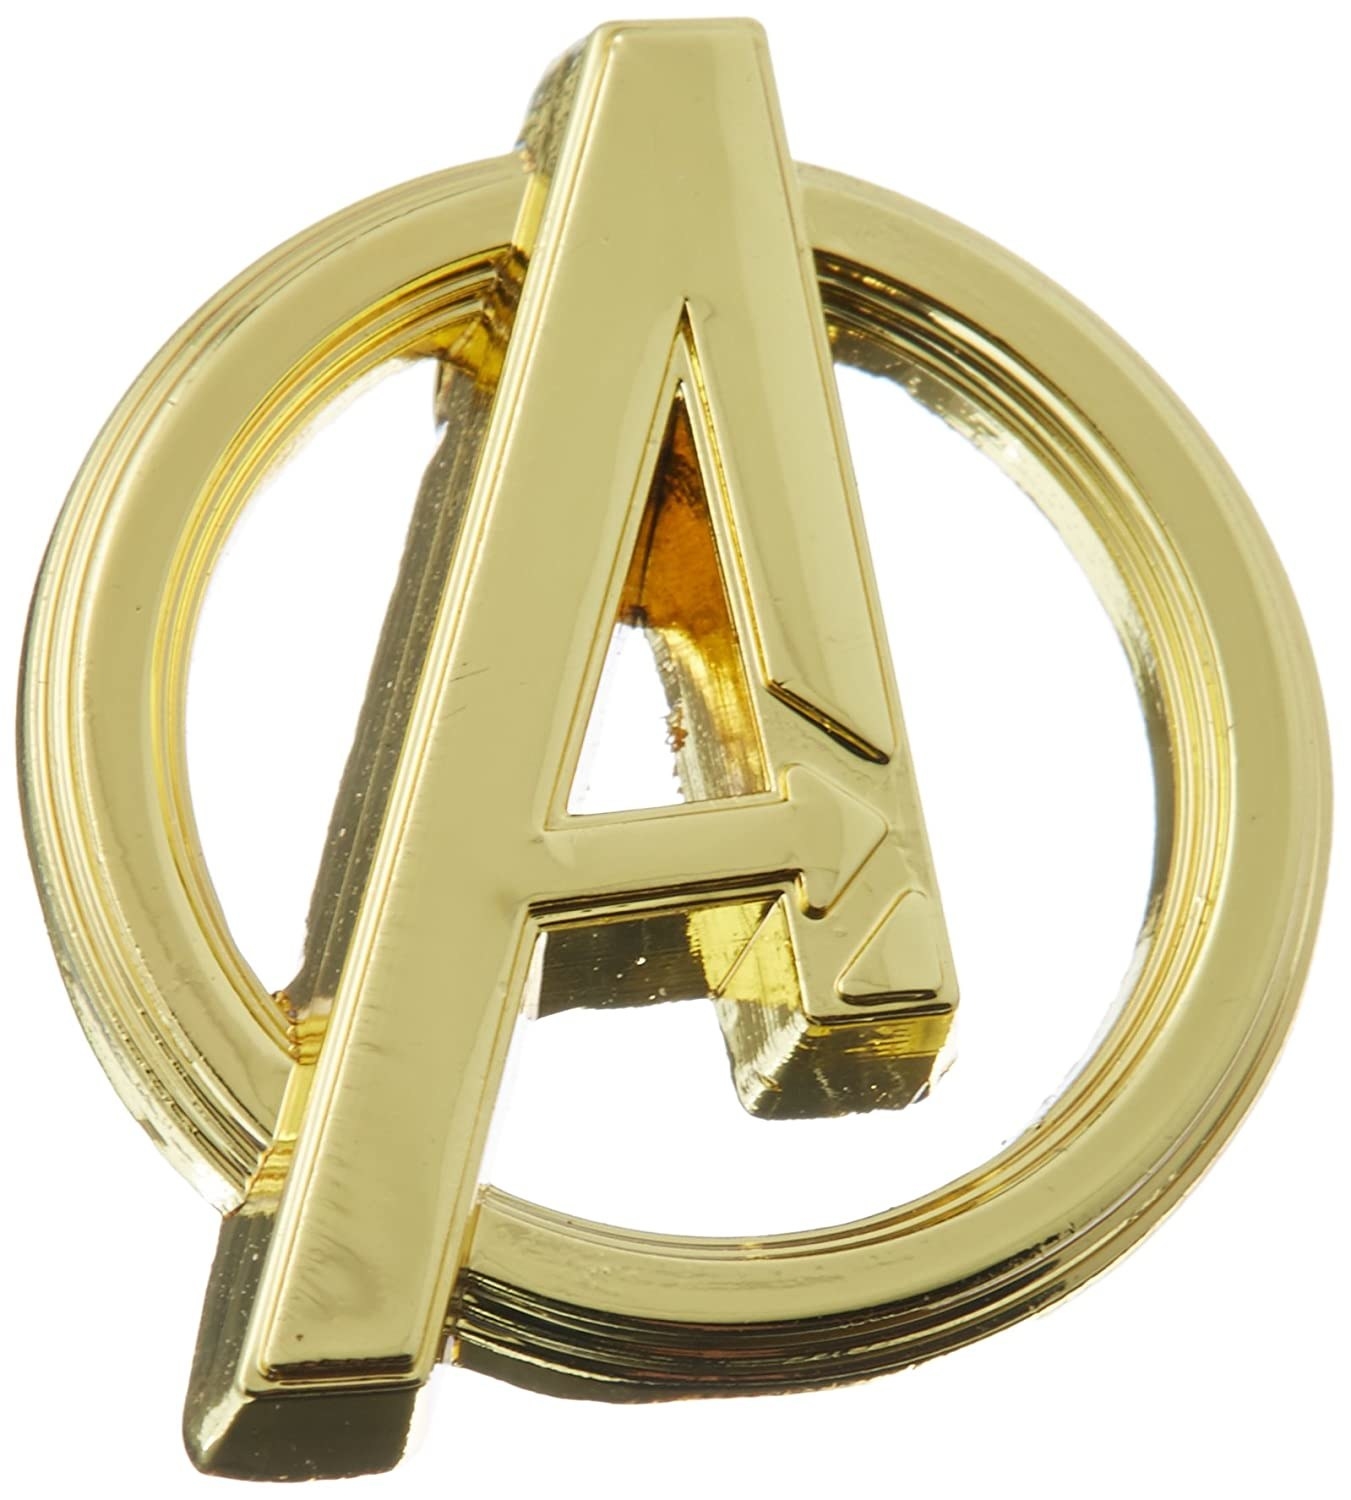 A golden lapel pin in the shape of the Avengers logo